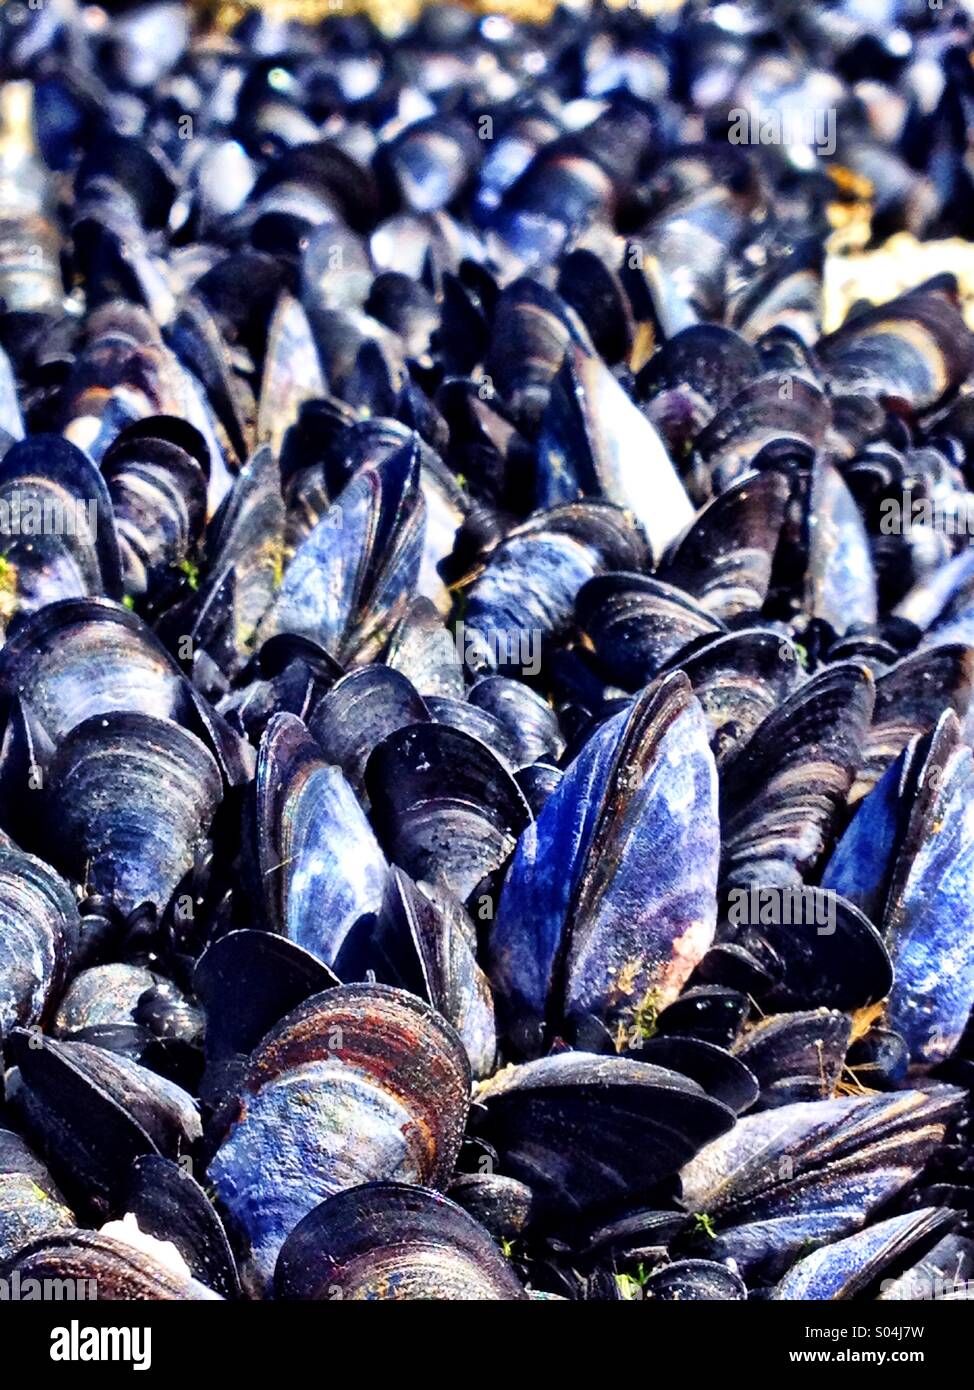 Wild Mussels Stock Photo